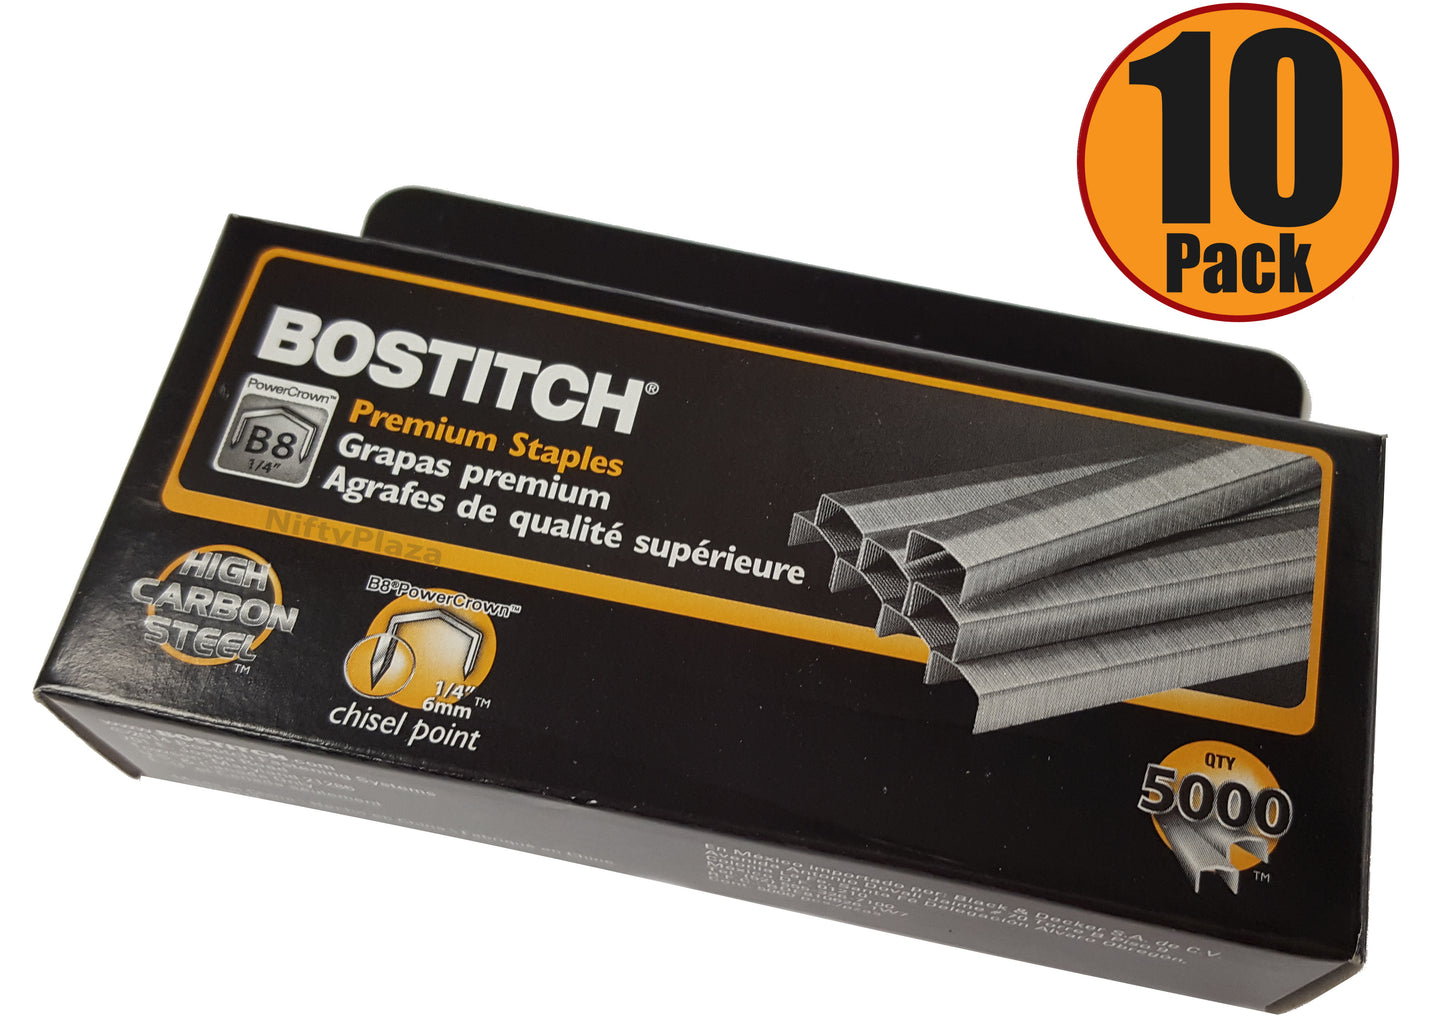 Stanley Bostitch B8 Staples 1/4 Inch, 10 Boxes (50000 Staples) Brand New